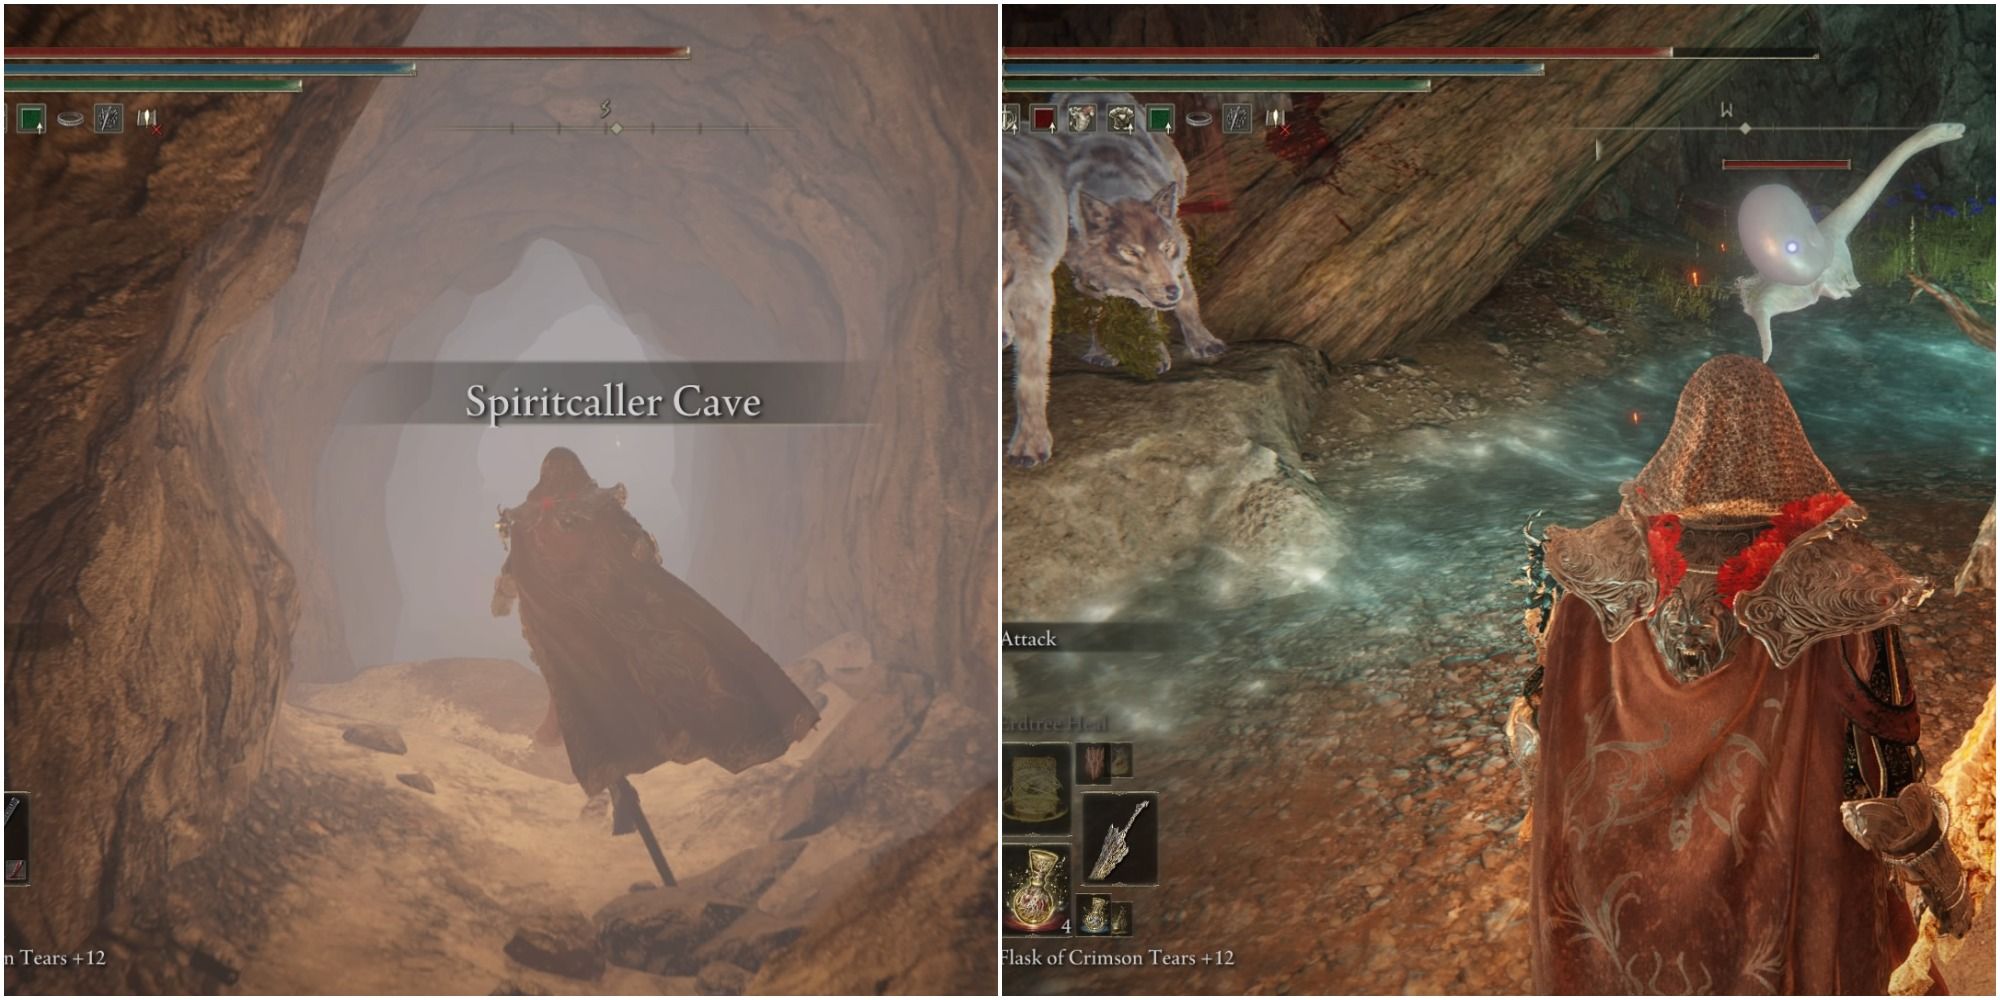 Split images showing the Spiritcaller Cave.